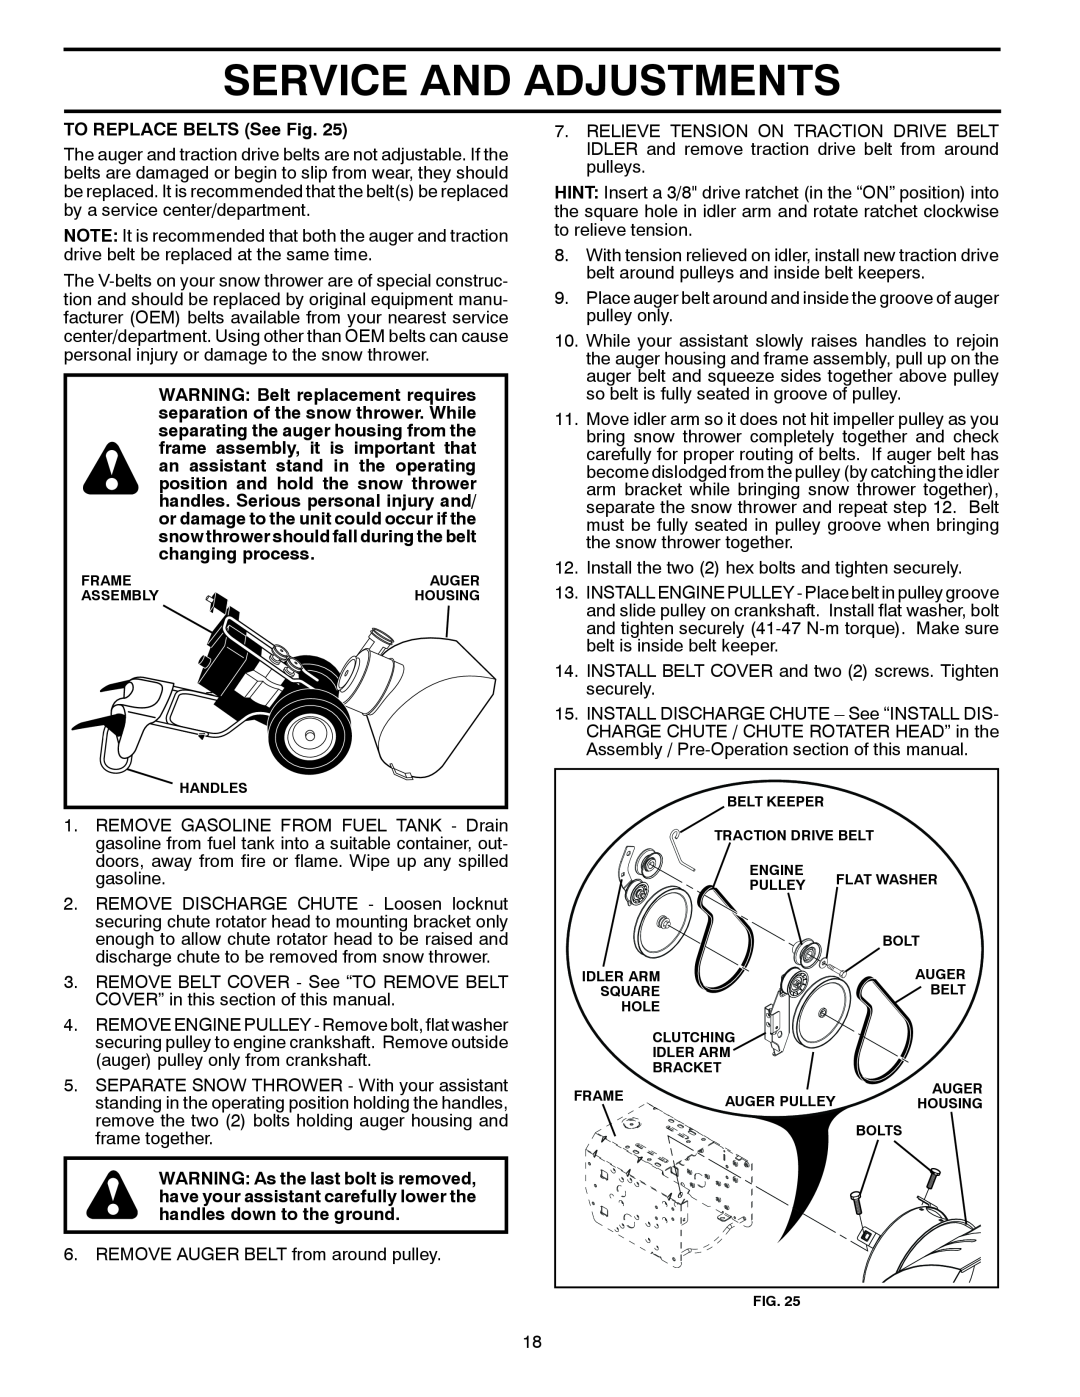 Husqvarna 13524SB-XLS owner manual Service And Adjustments, TO REPLACE BELTS See Fig 